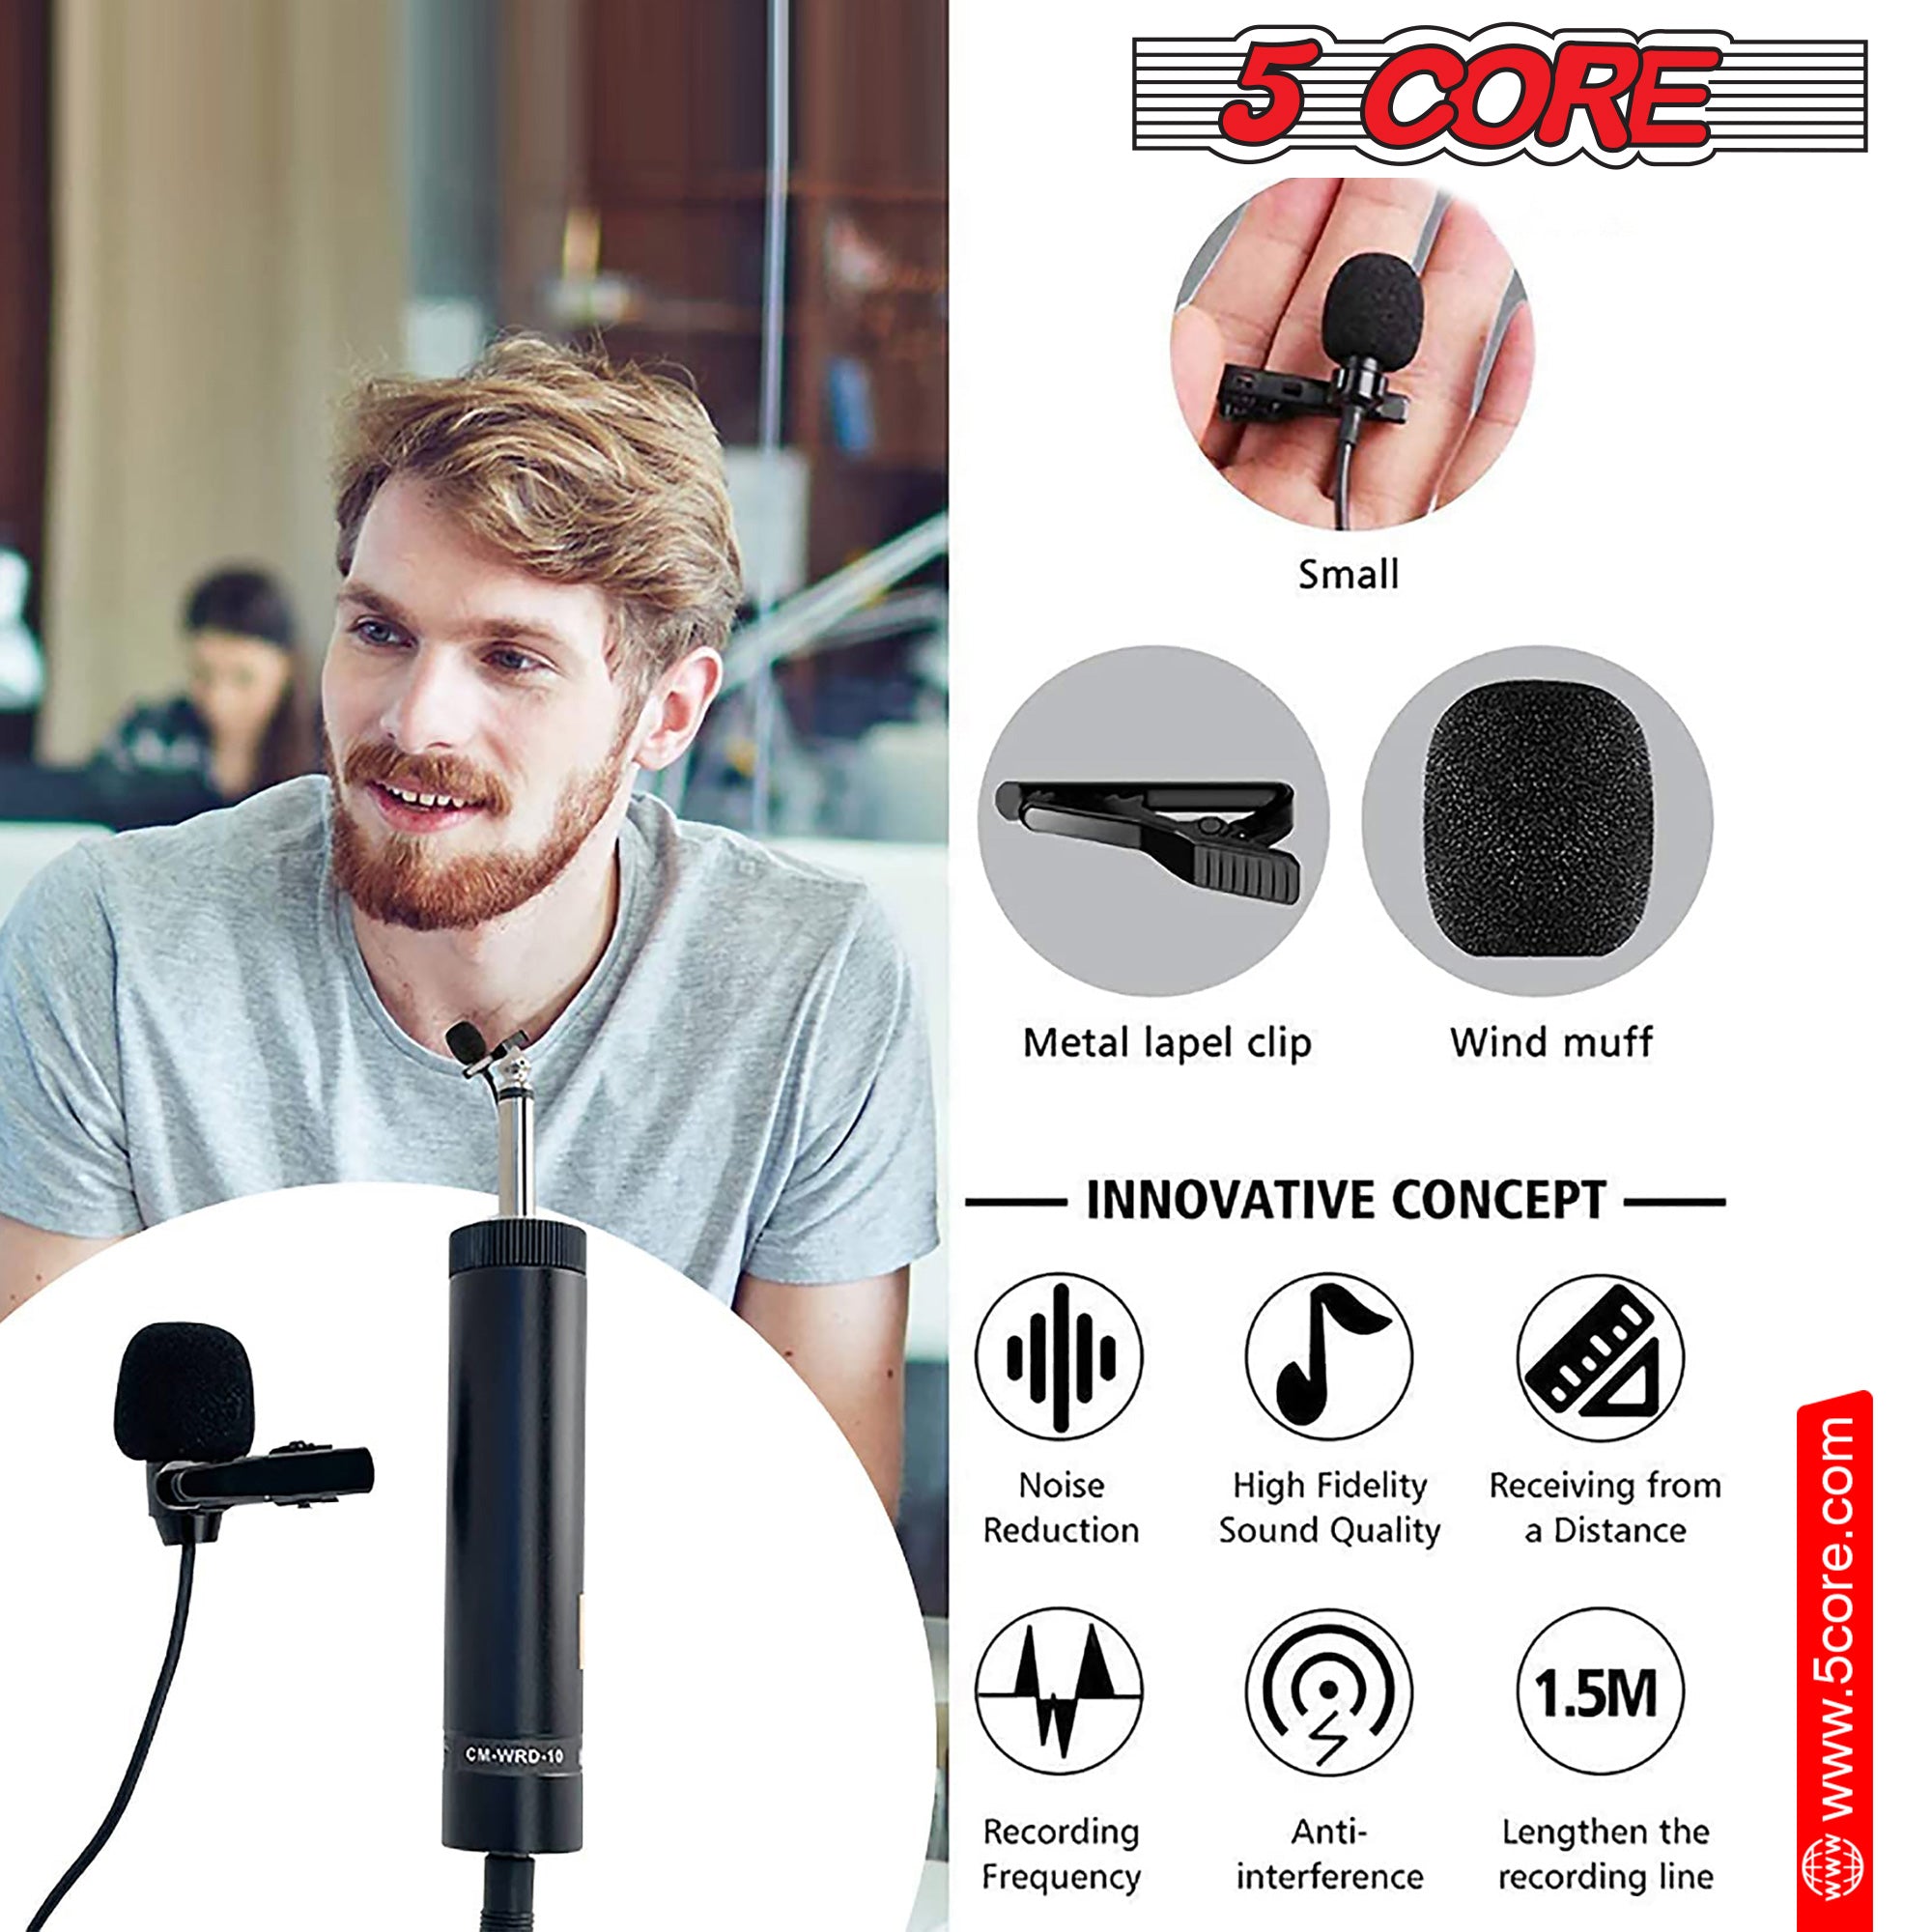 5 Core Lavalier Microphone for iPhone & Tablet External Clip On Mini Lapel Mic for Video Recording & Vlogging with 3.5mm Connector -MIC WRD 10